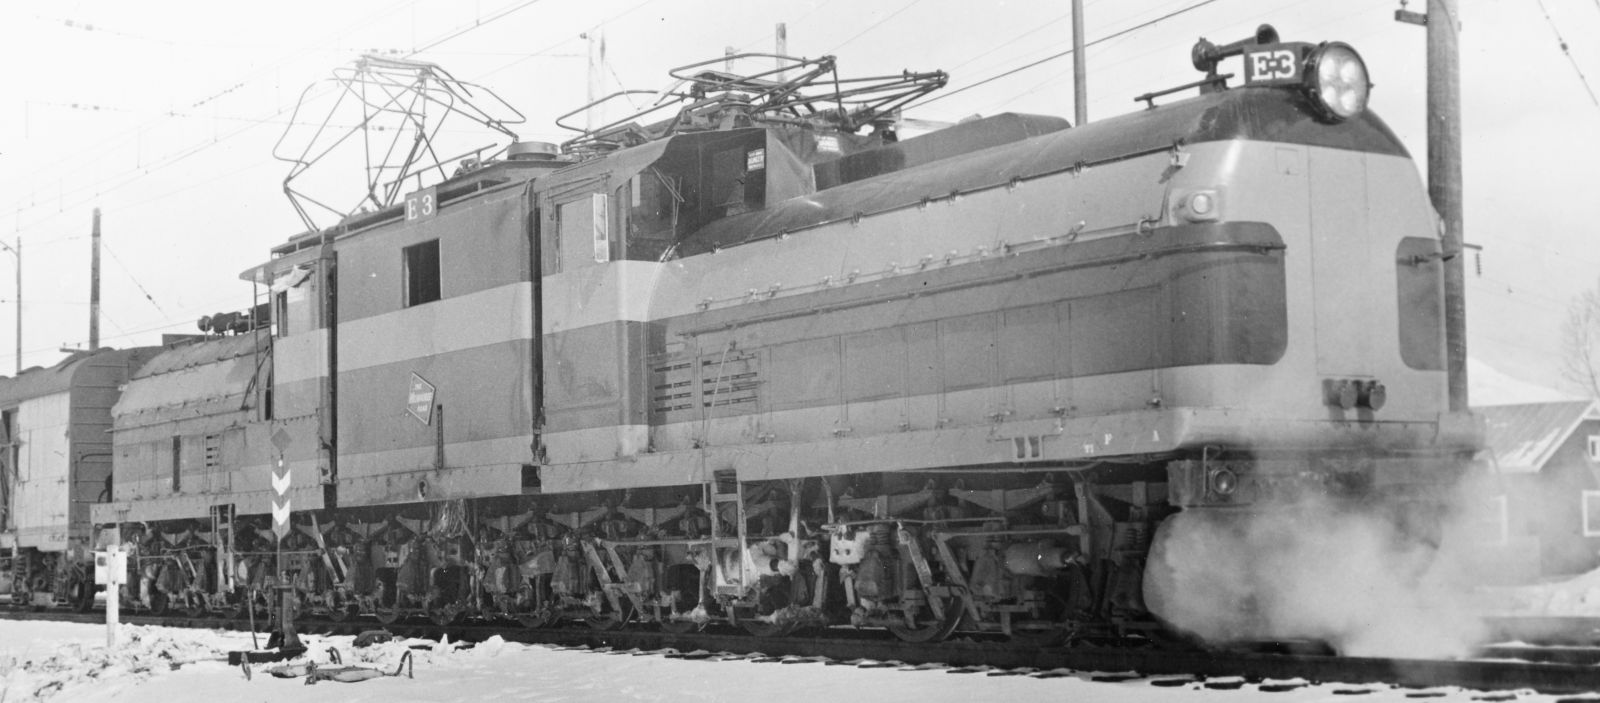 E-3 after conversion in January 1958 in Butte, Montana